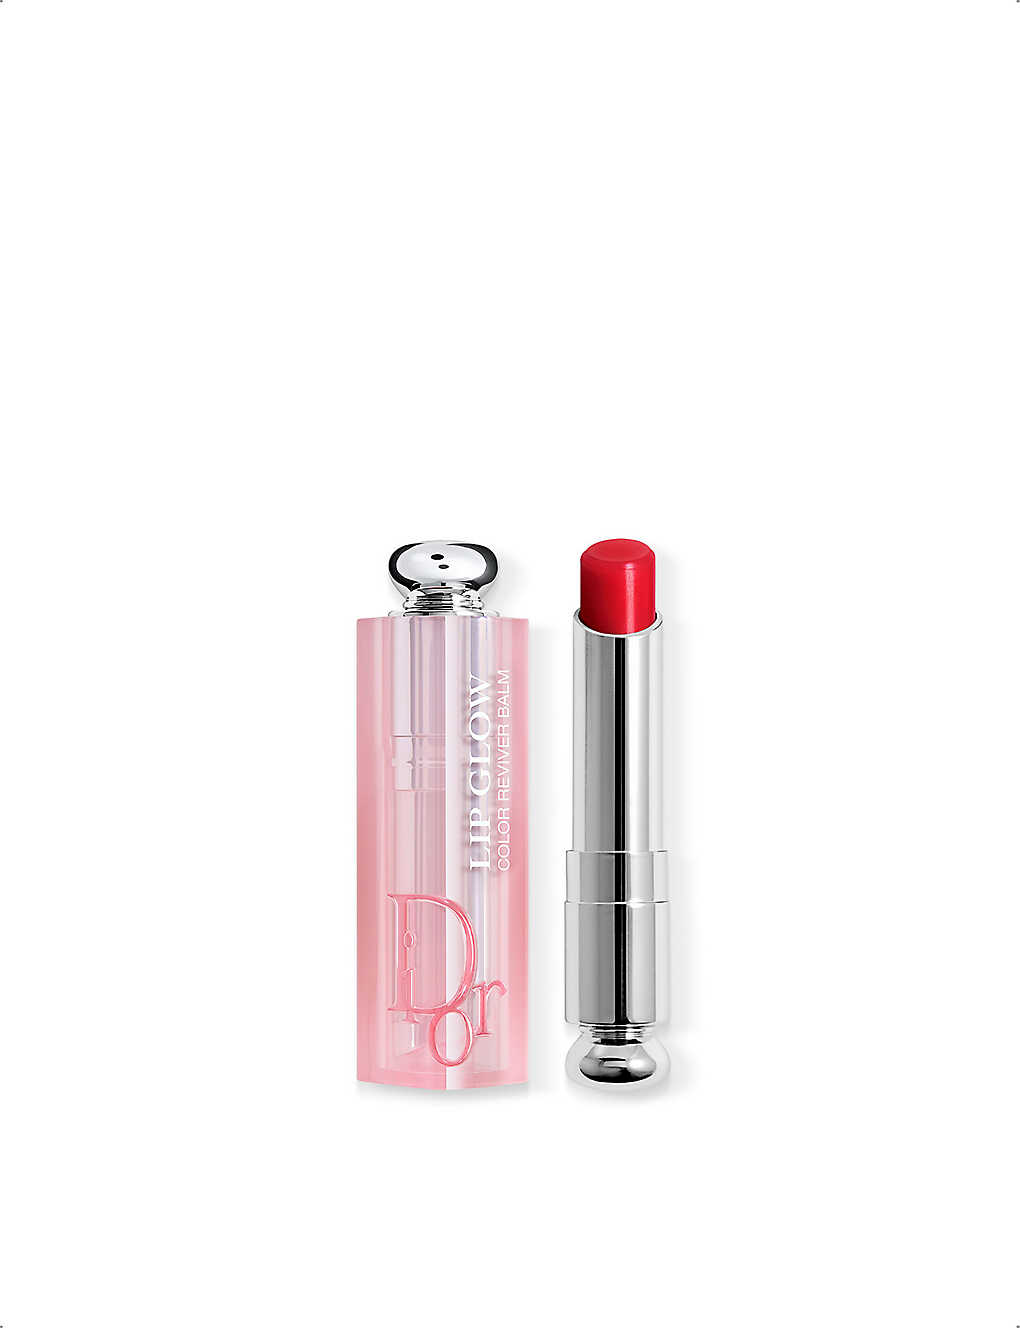 Dior 059 Red Bloom Addict Lip Glow Blooming Boudoir Limited-edition Gloss 3.2g